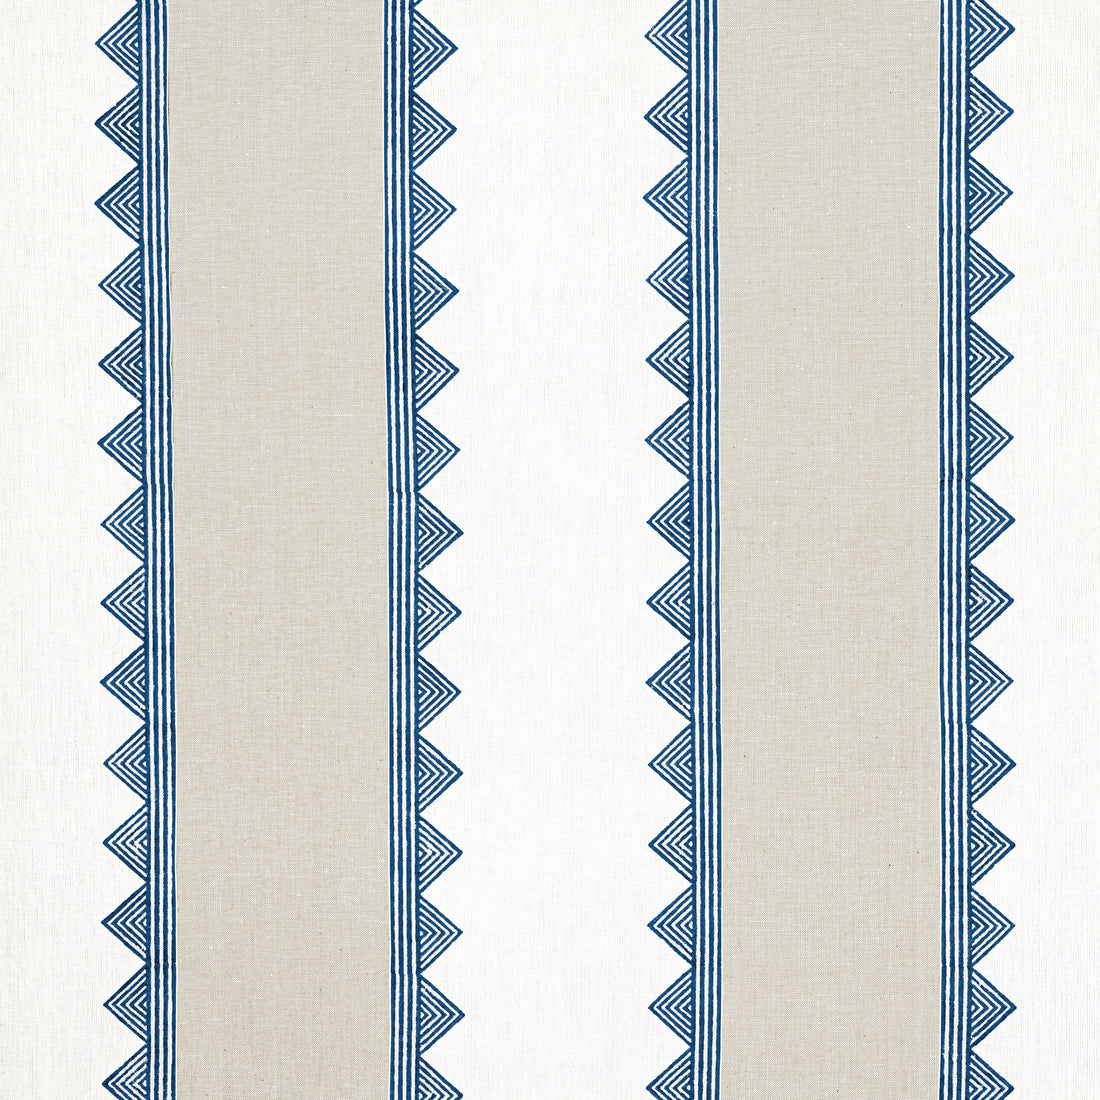 Kismet Stripe fabric in navy color - pattern number F916226 - by Thibaut in the Kismet collection